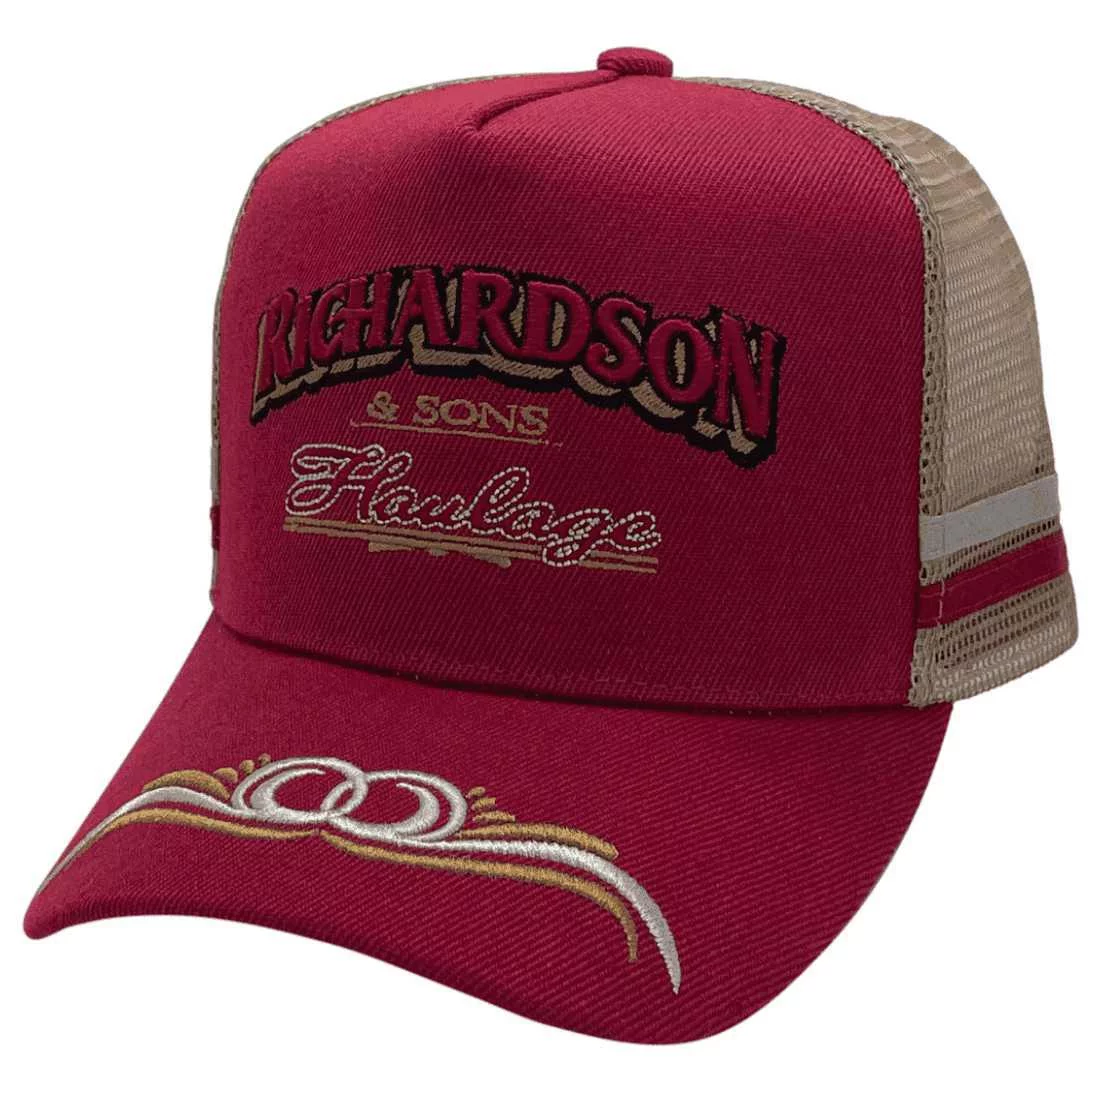 Richardson & Sons Haulage Henty NSW HP Original Power Aussie Trucker Hat with double sidebands and Australian Head Fit Crown Maroon Gold Grey